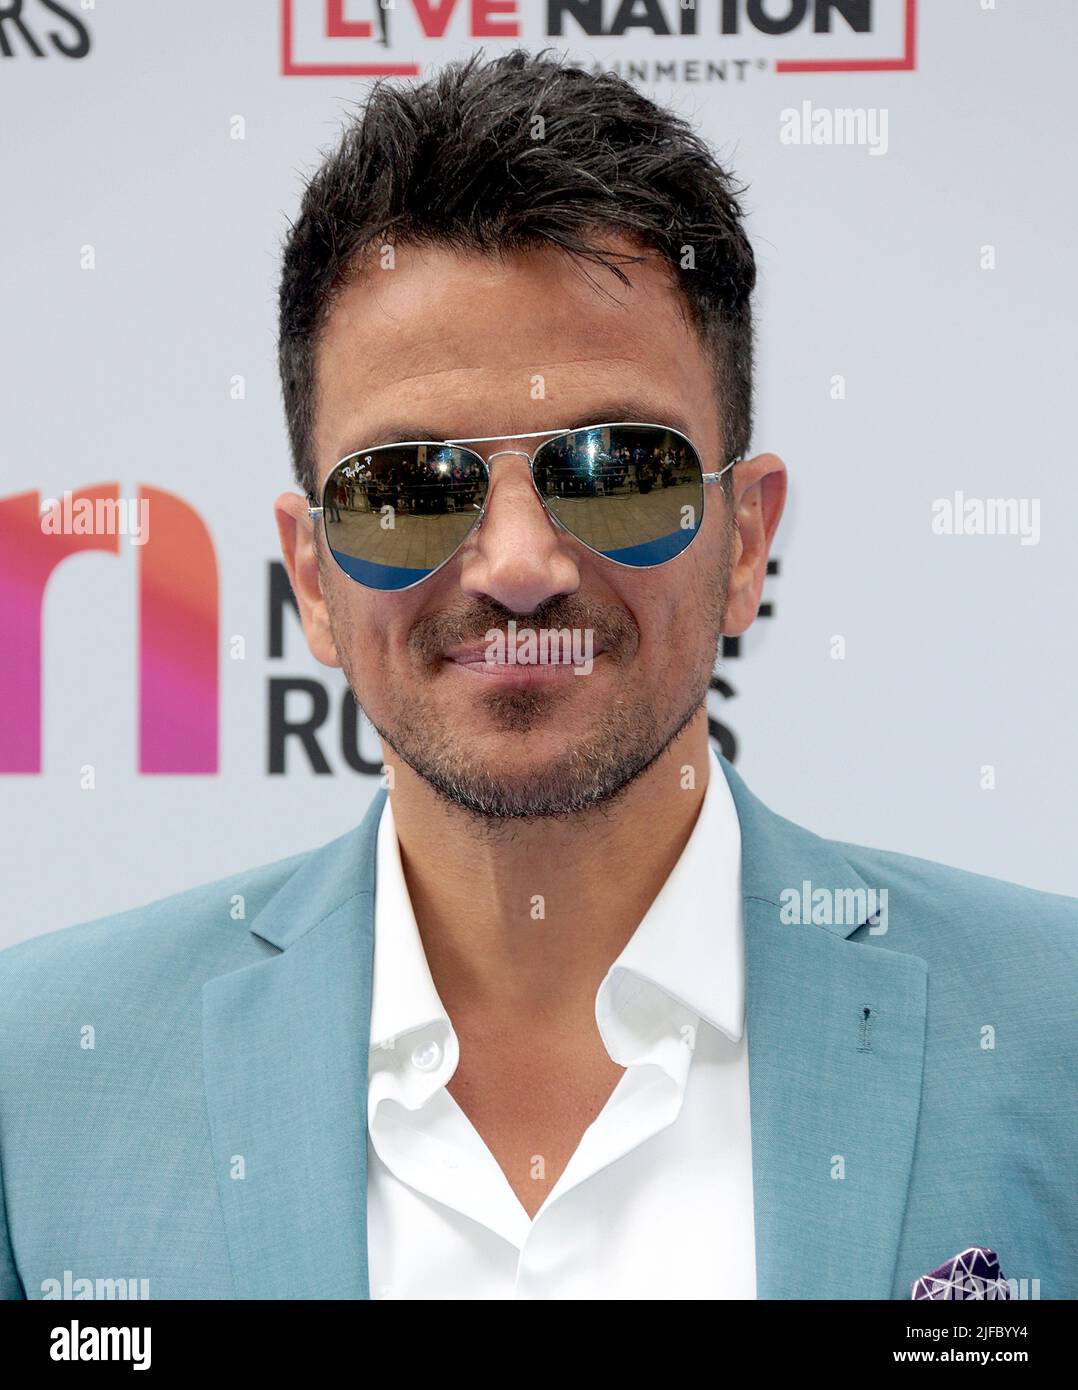 Jul 01, 2022 - London, England, UK - Peter Andre attending Nordoff Robbins O2 Silver Clef Awards 2022, Grosvenor House Hotel Stock Photo